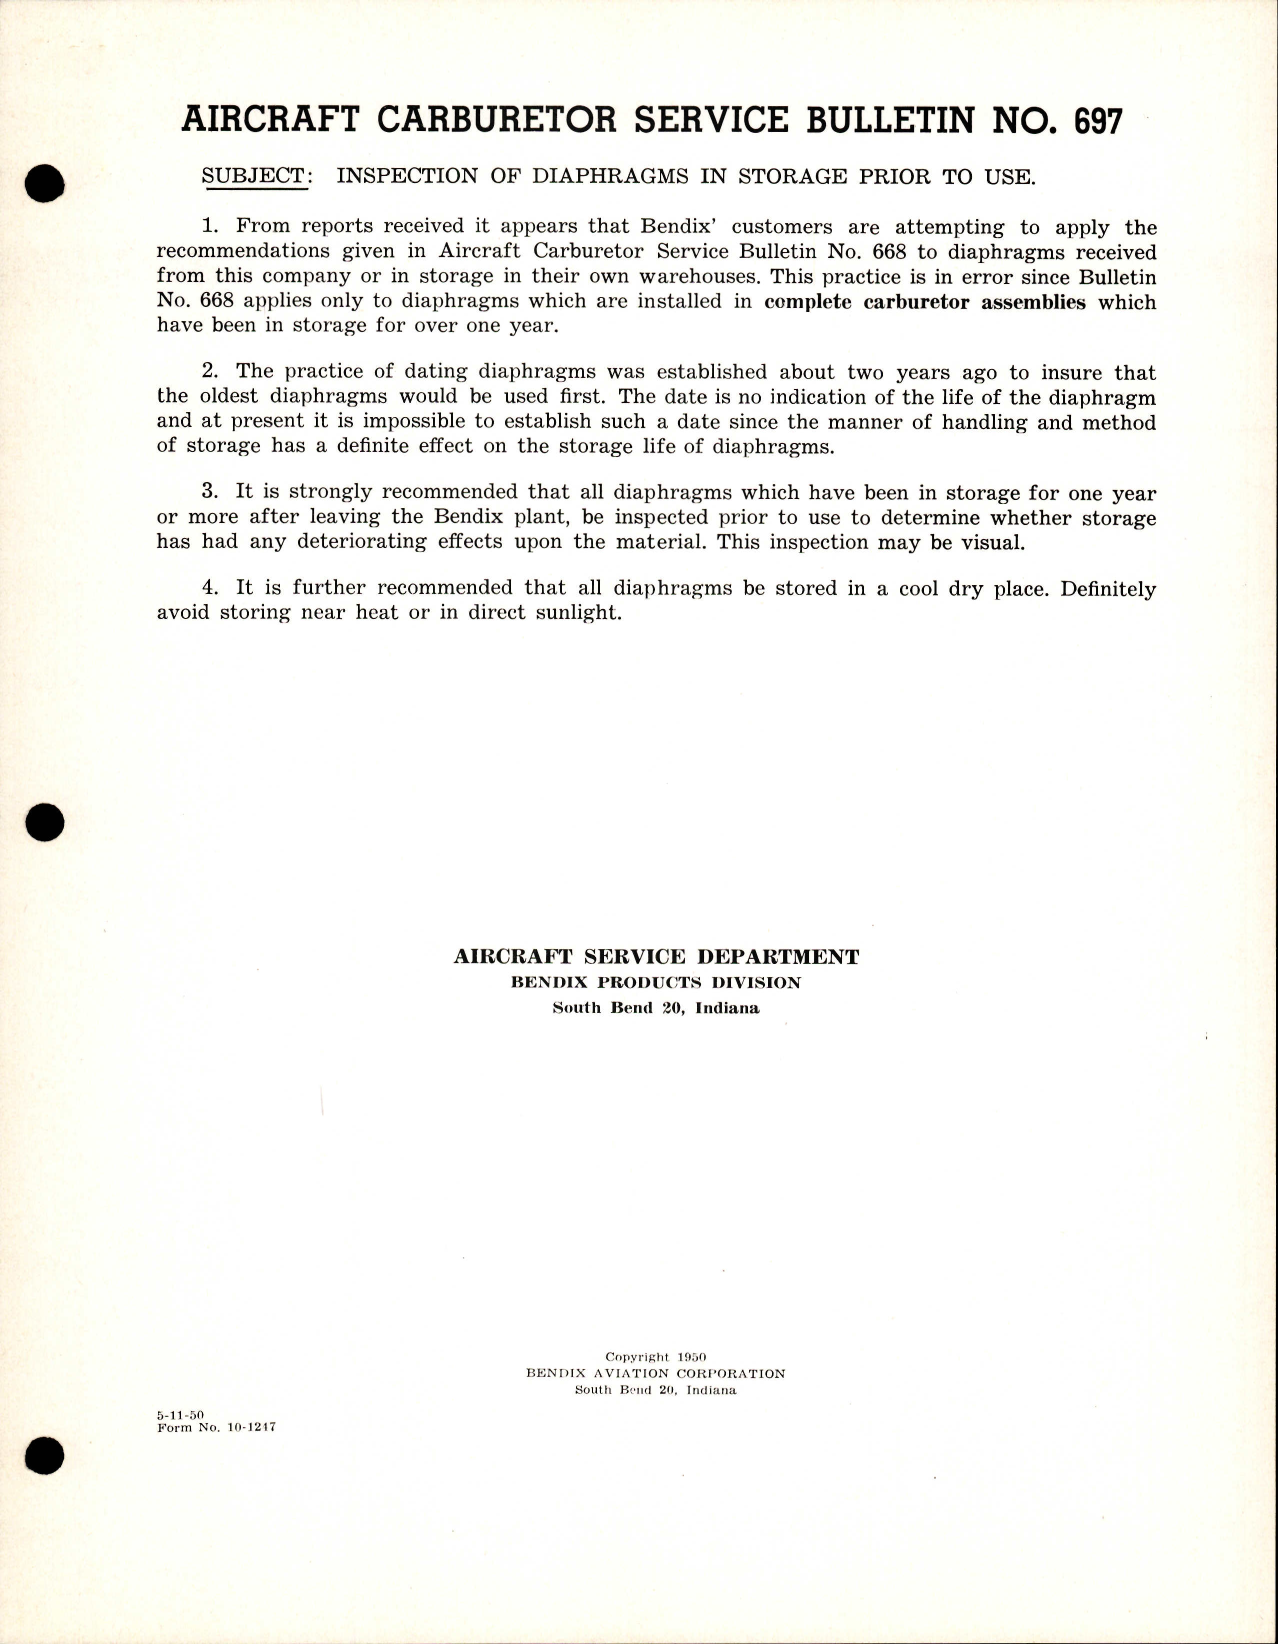 Sample page 1 from AirCorps Library document: Inspection of Diaphragms in Storage Prior to Use